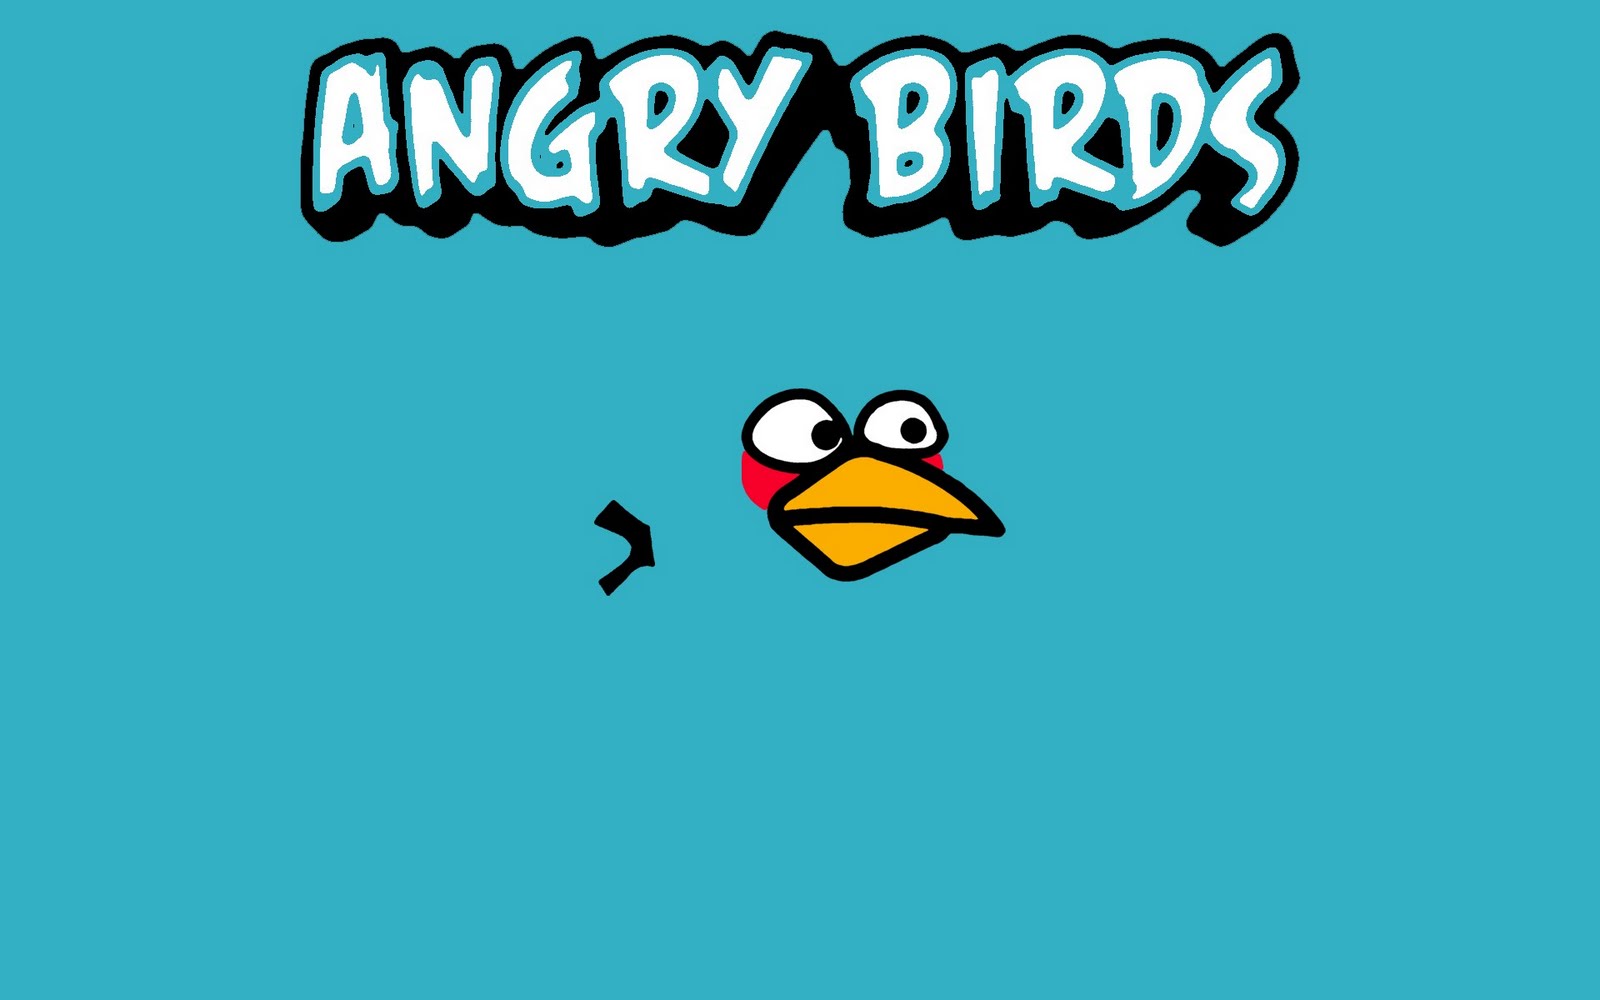 35 Different Angry Birds Pictures